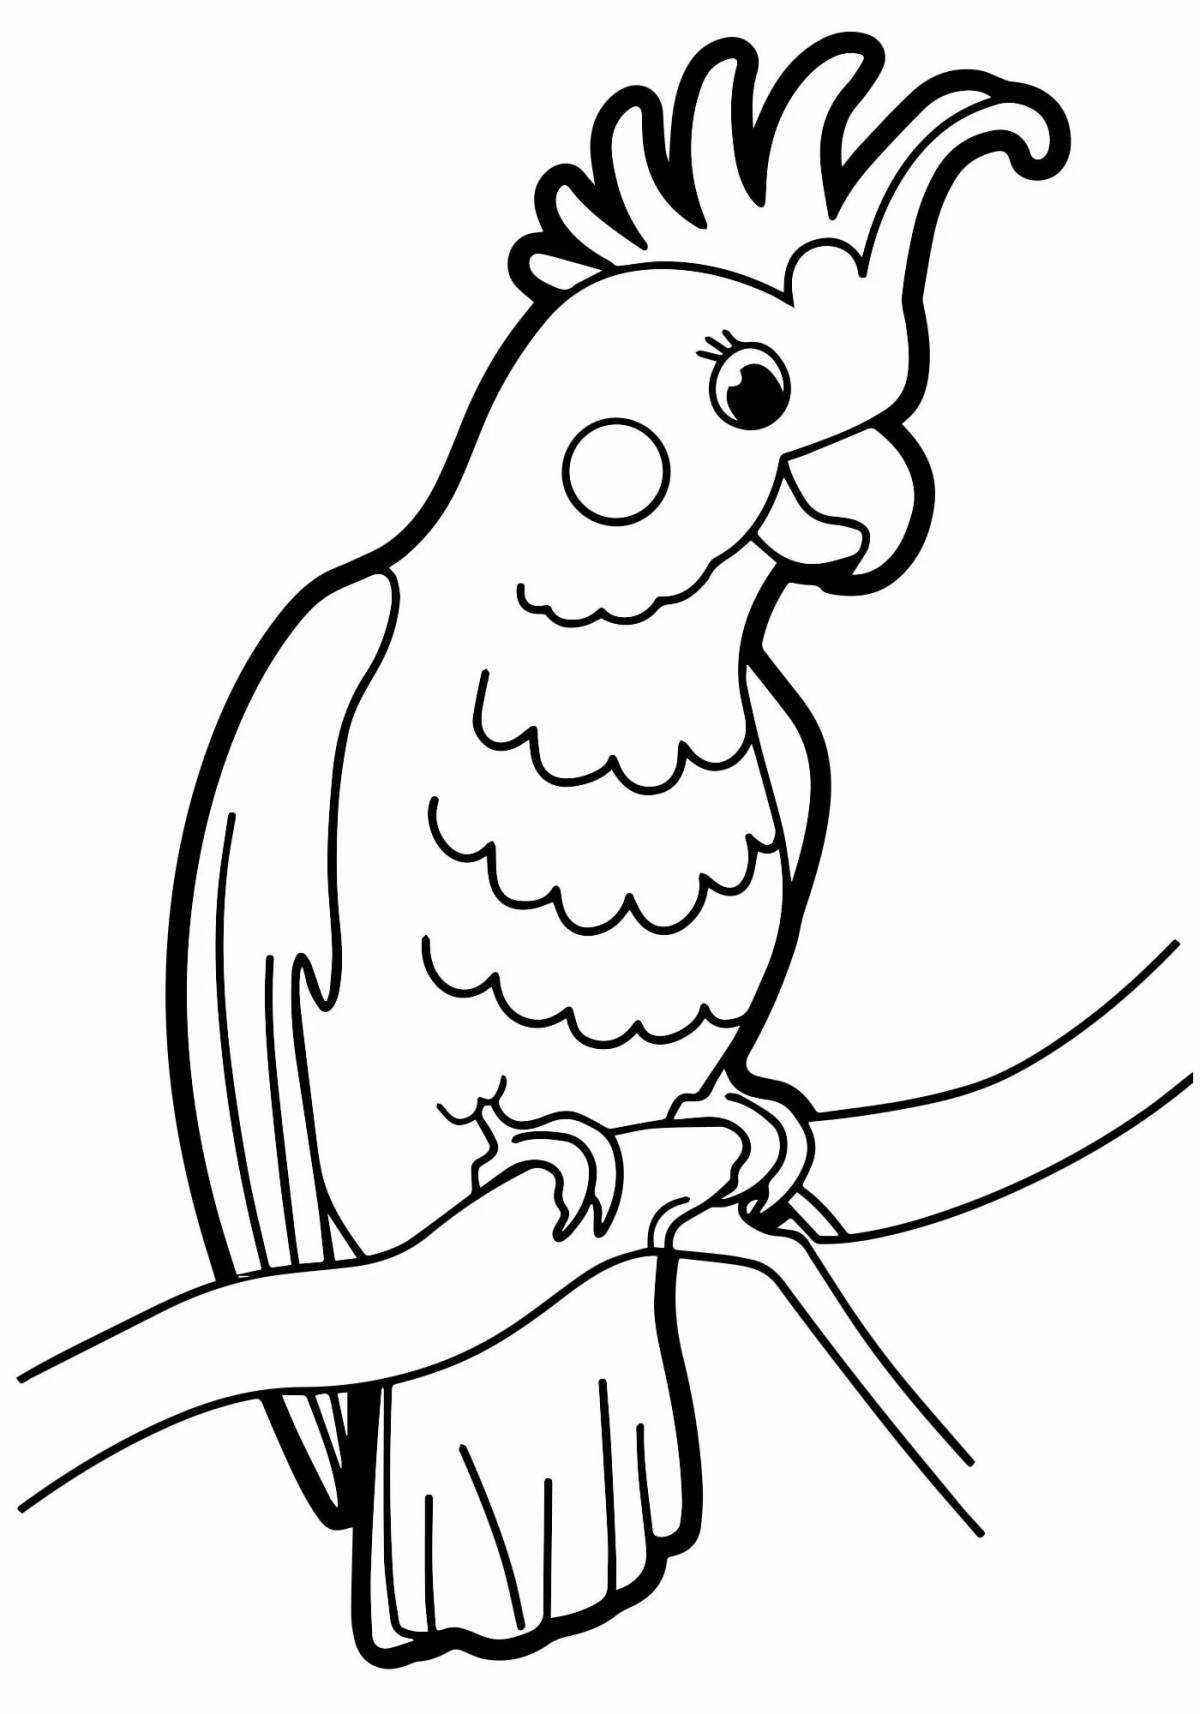 Adorable parrot coloring book for 3-4 year olds